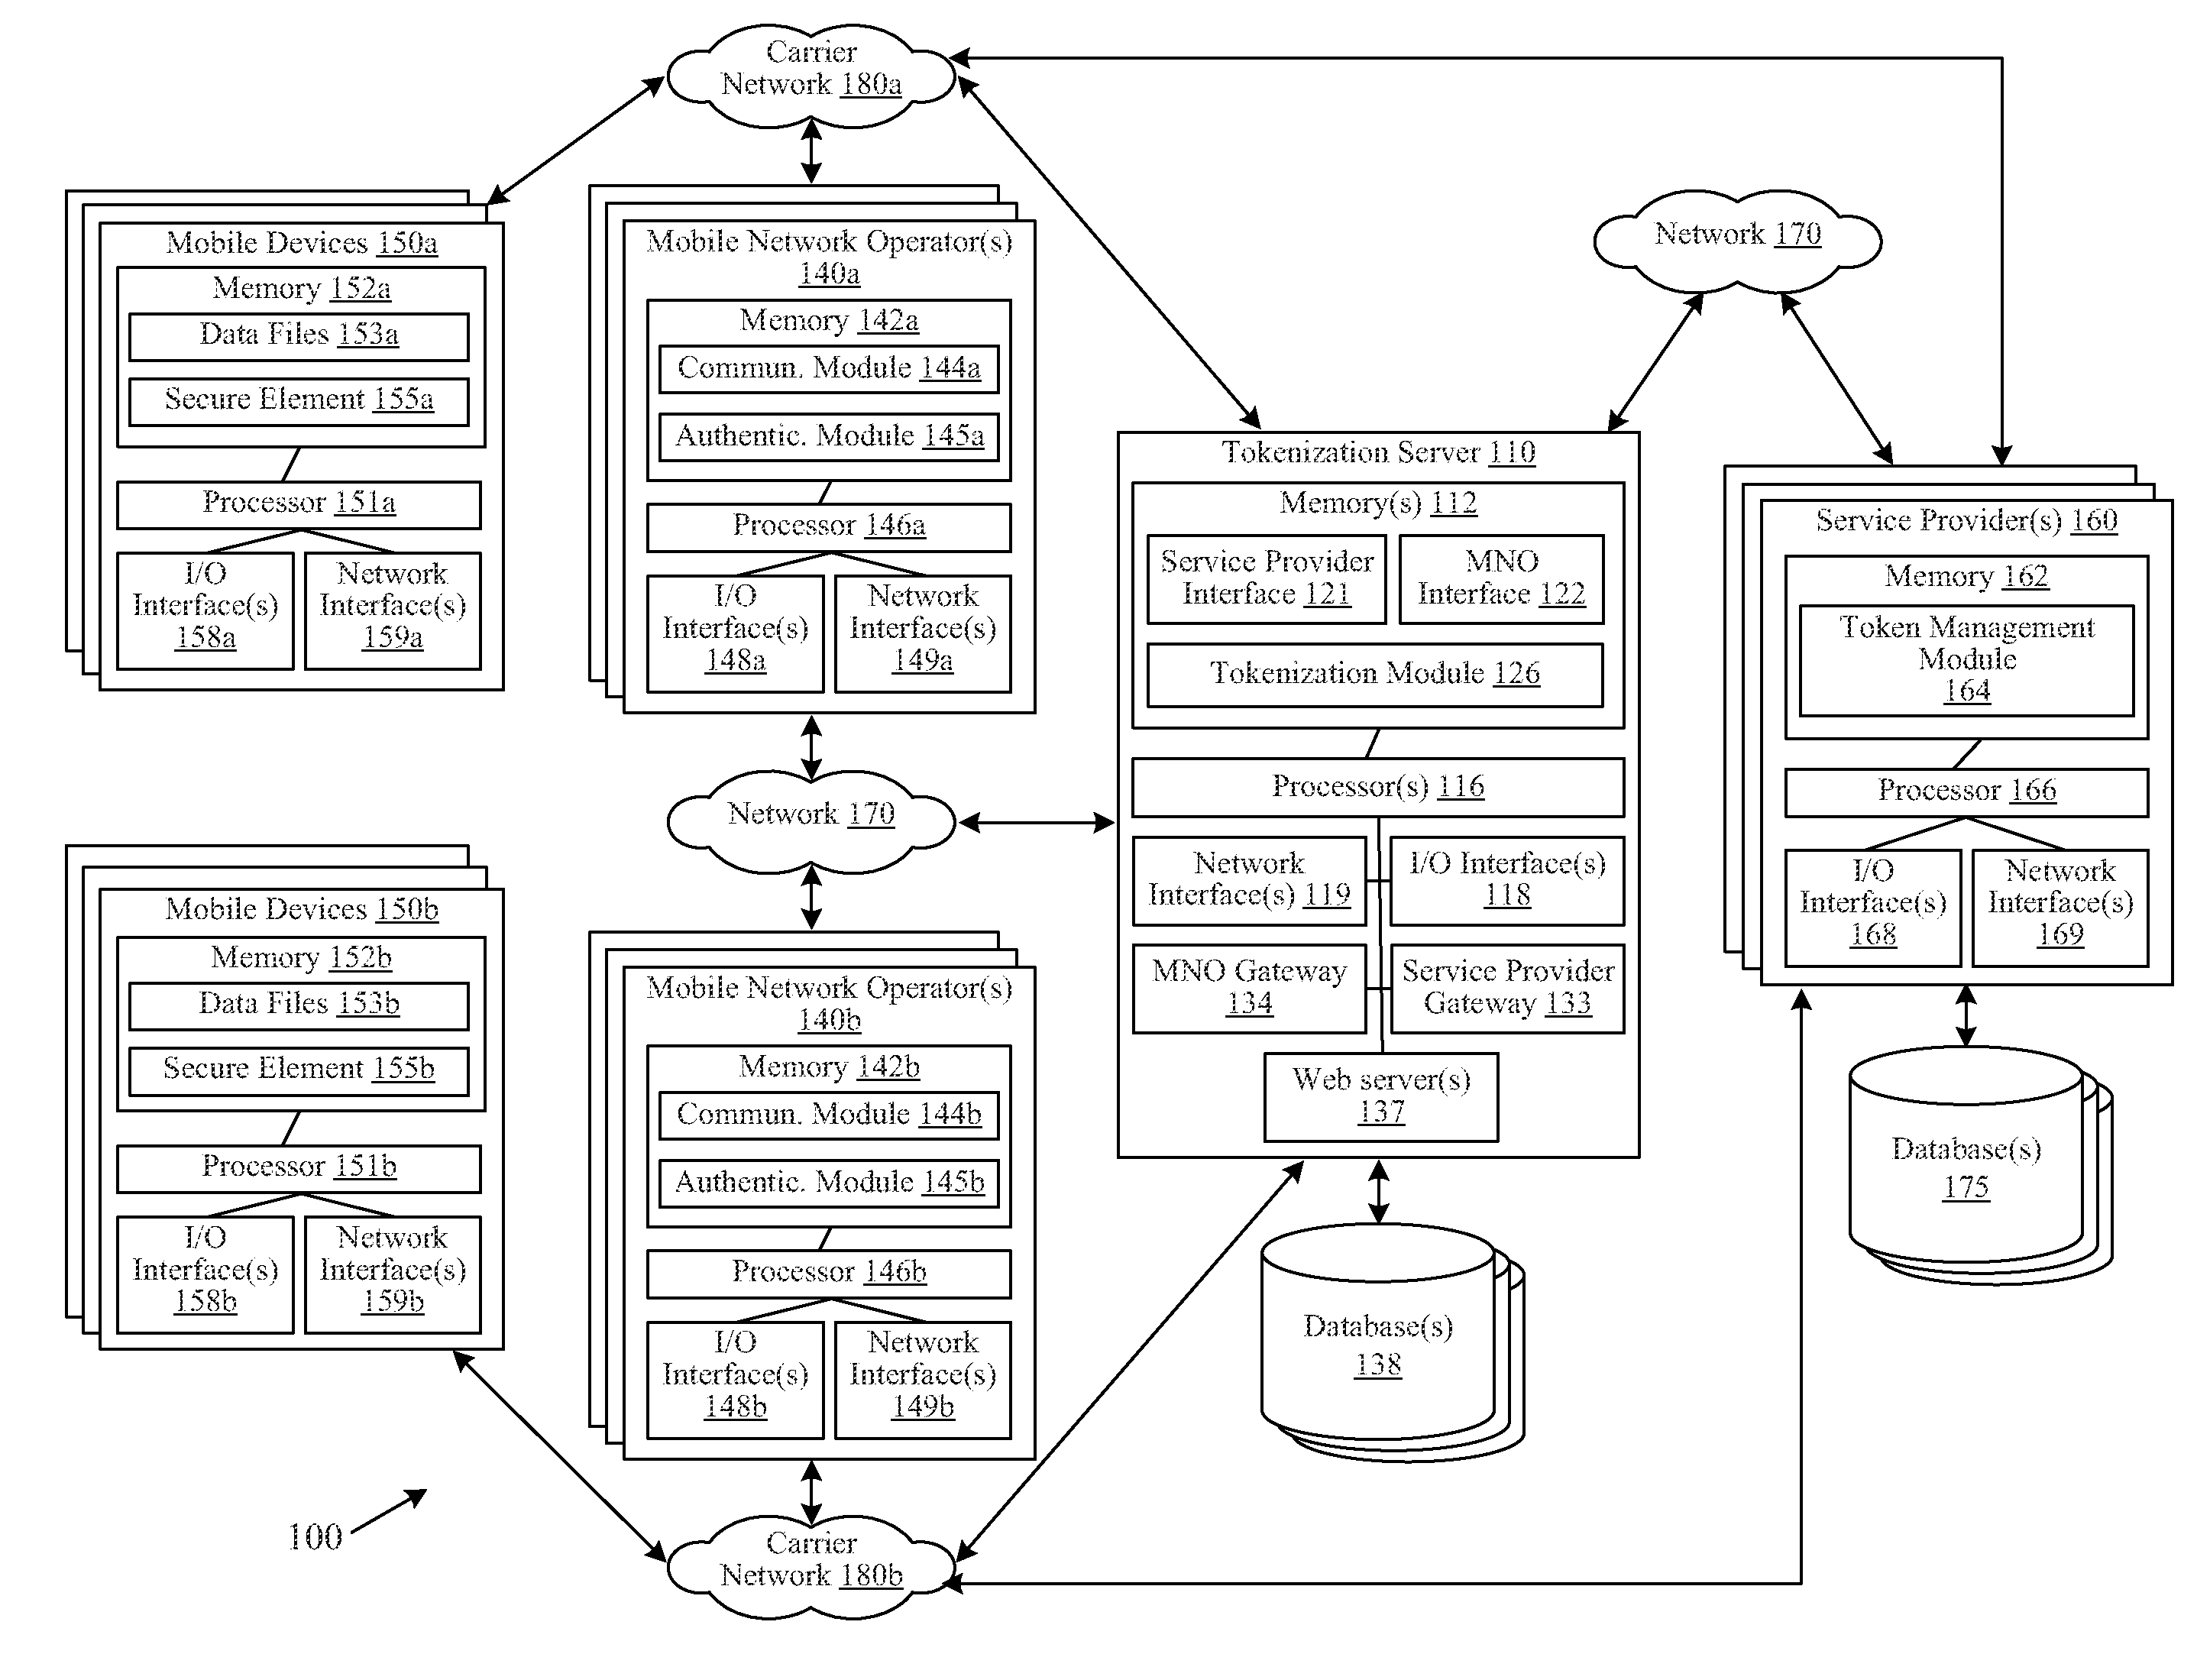 Systems and Methods for Tokenizing Financial Information